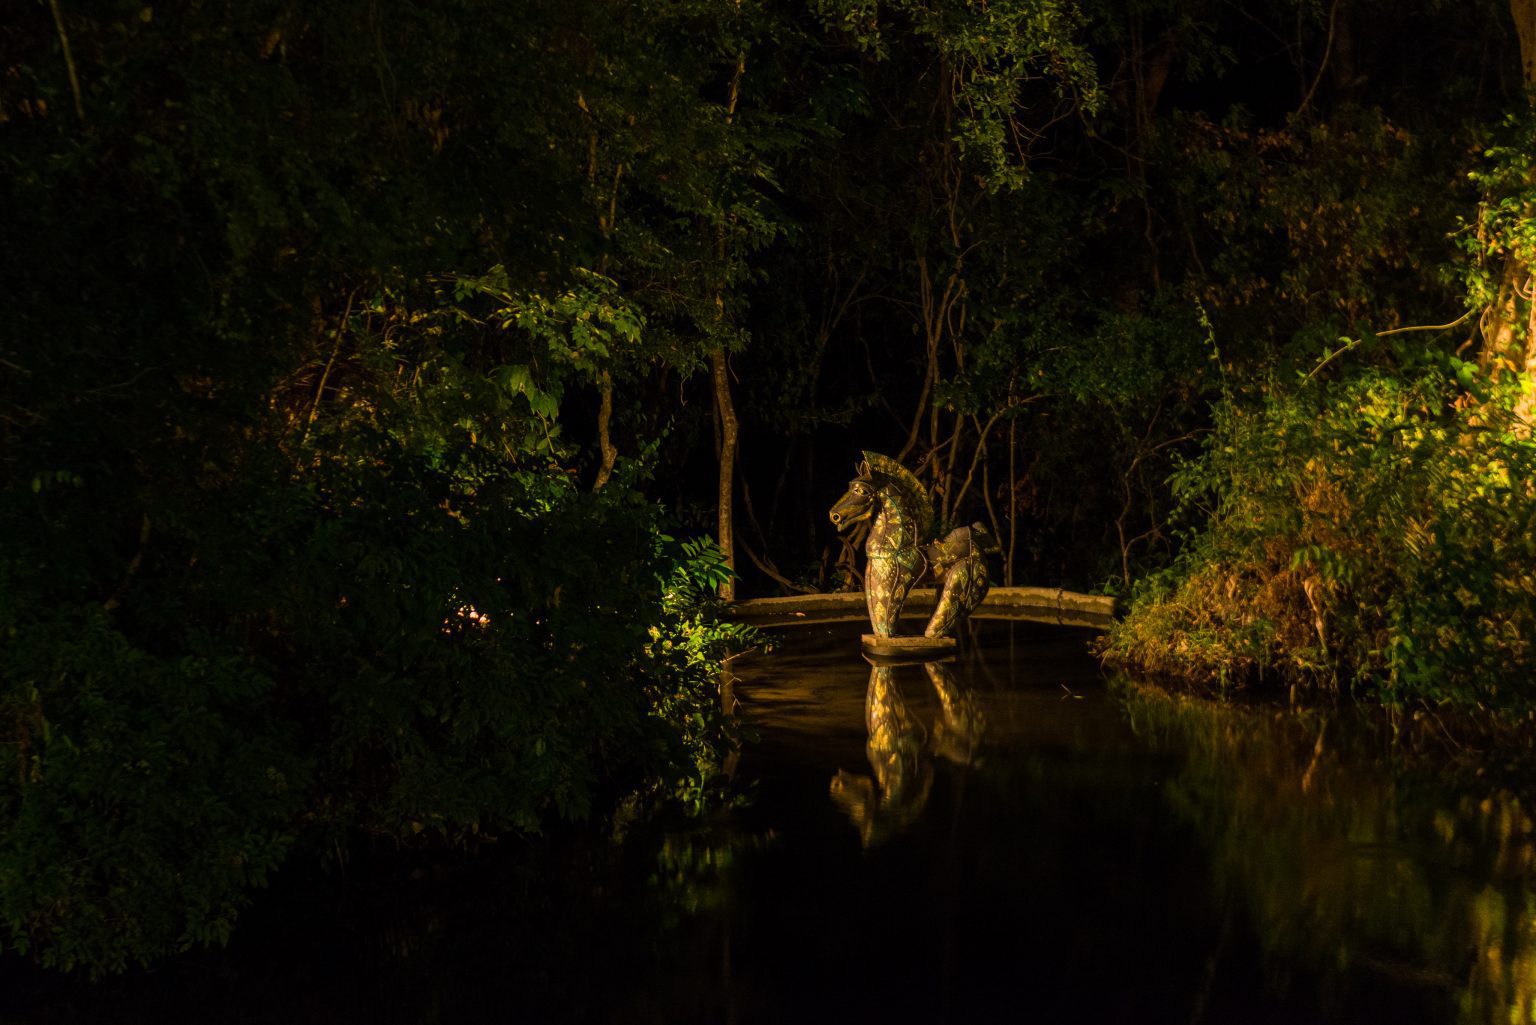 Horse sculpture located in the art and nature forest at Diyabubula. This image taken at the night has captured the water, greenery of the forest and the beautiful golden sculpture